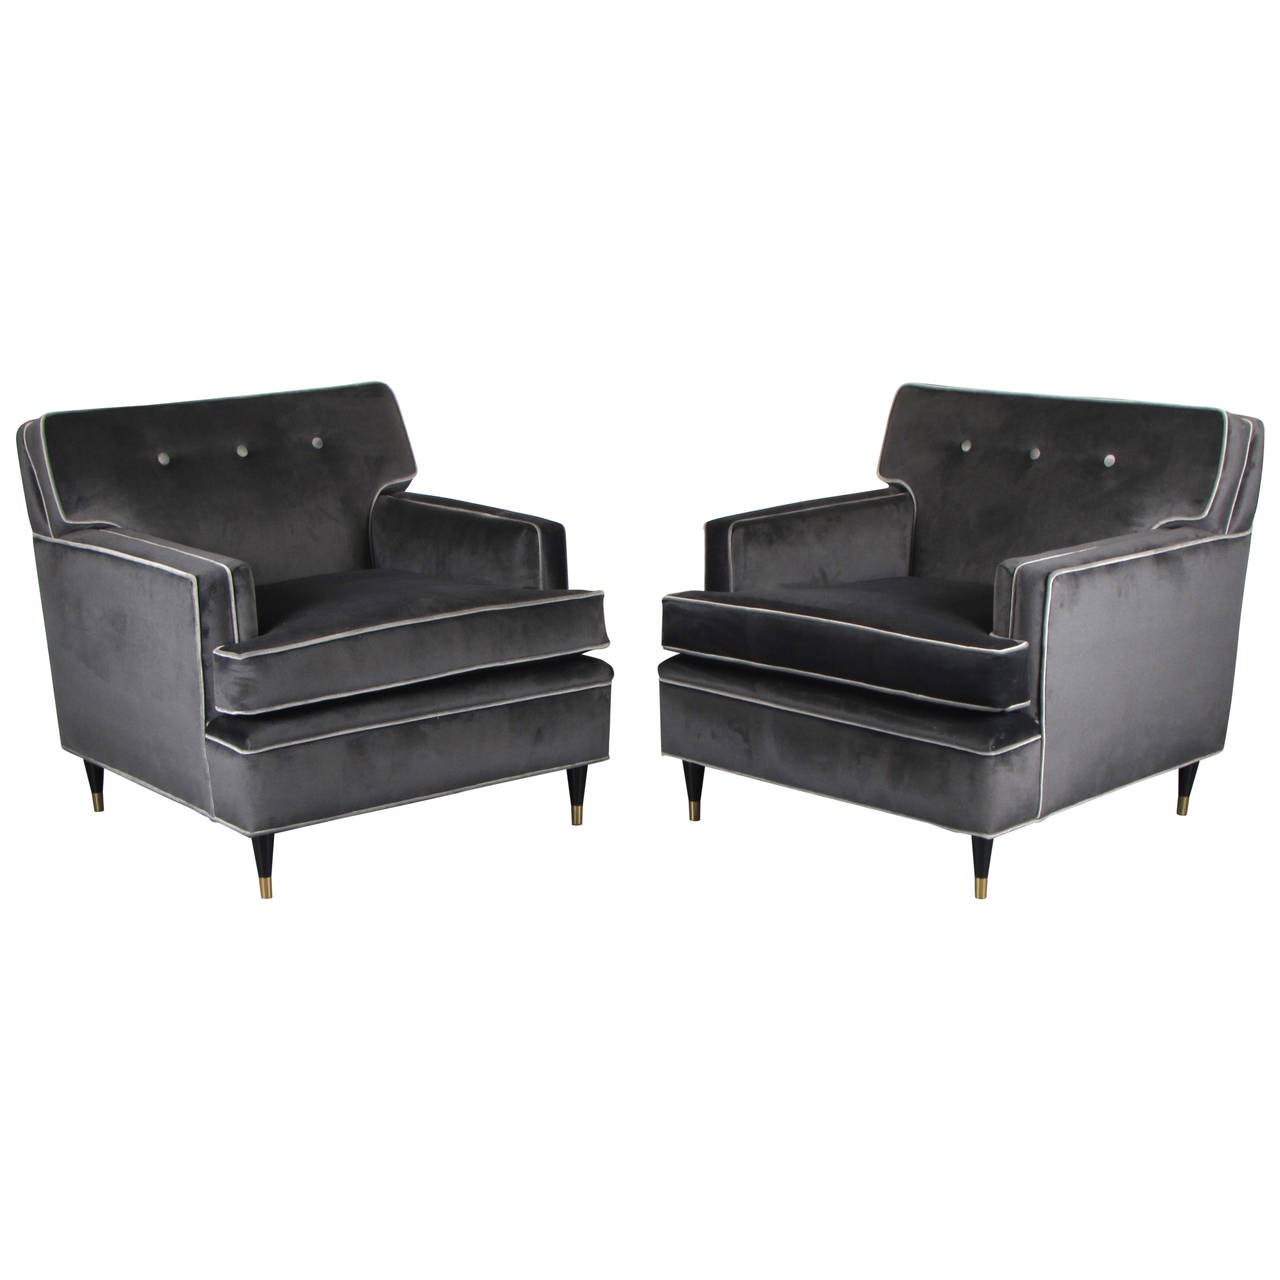 Pair of Charcoal Velvet Tuxedo Lounge Chairs After Harvey Probber, 1960s